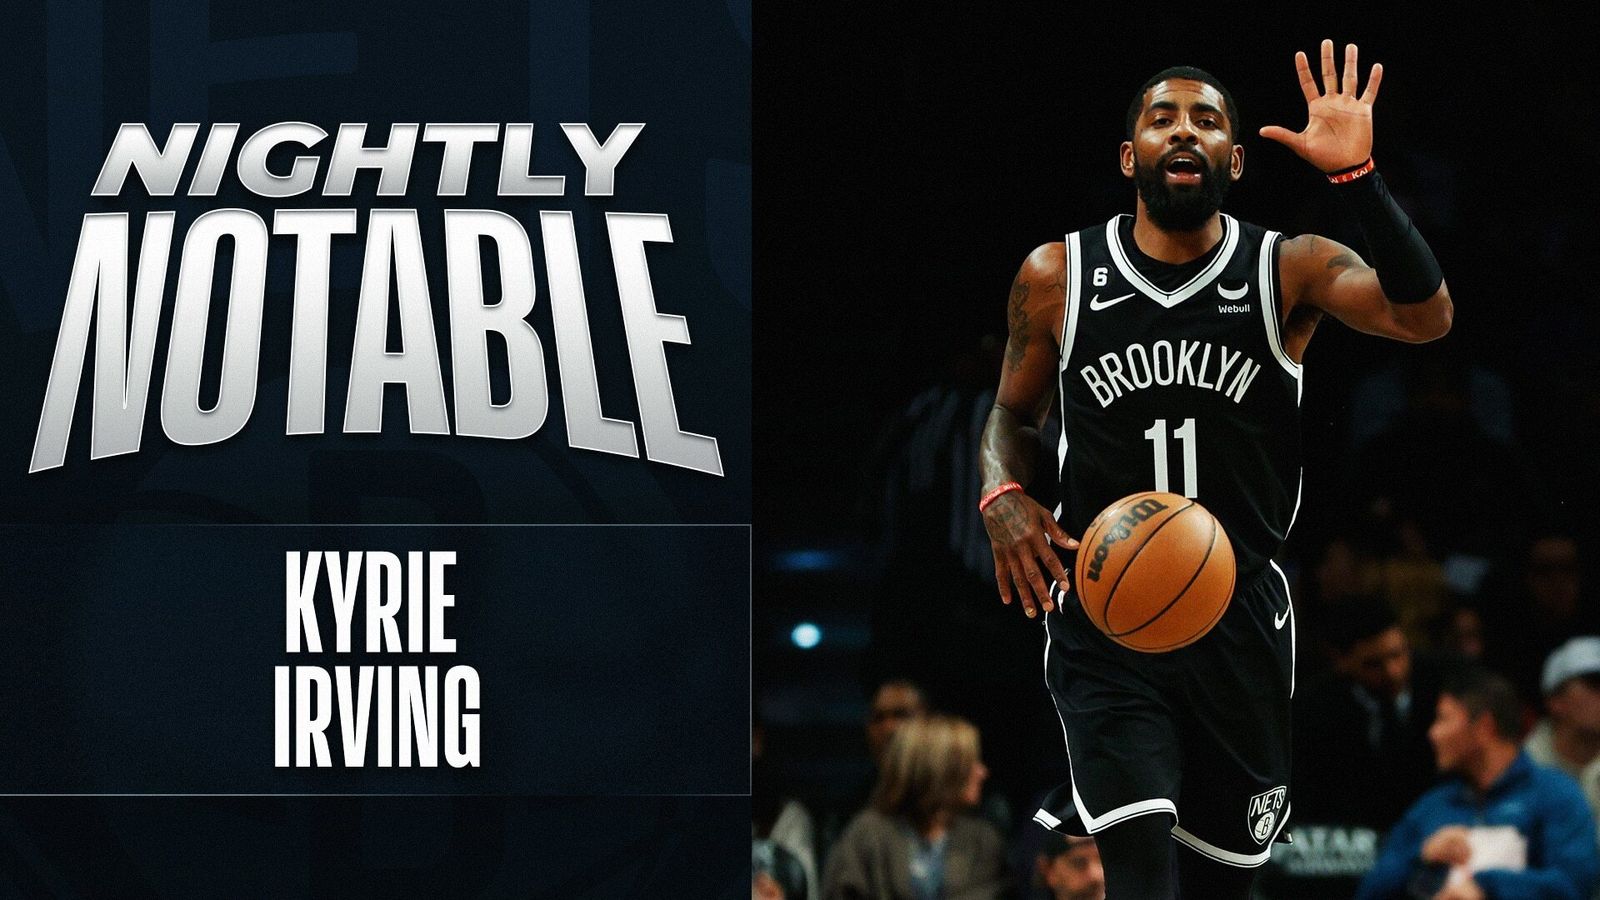 Kyrie Irving opts in to stay with Nets National News - Bally Sports